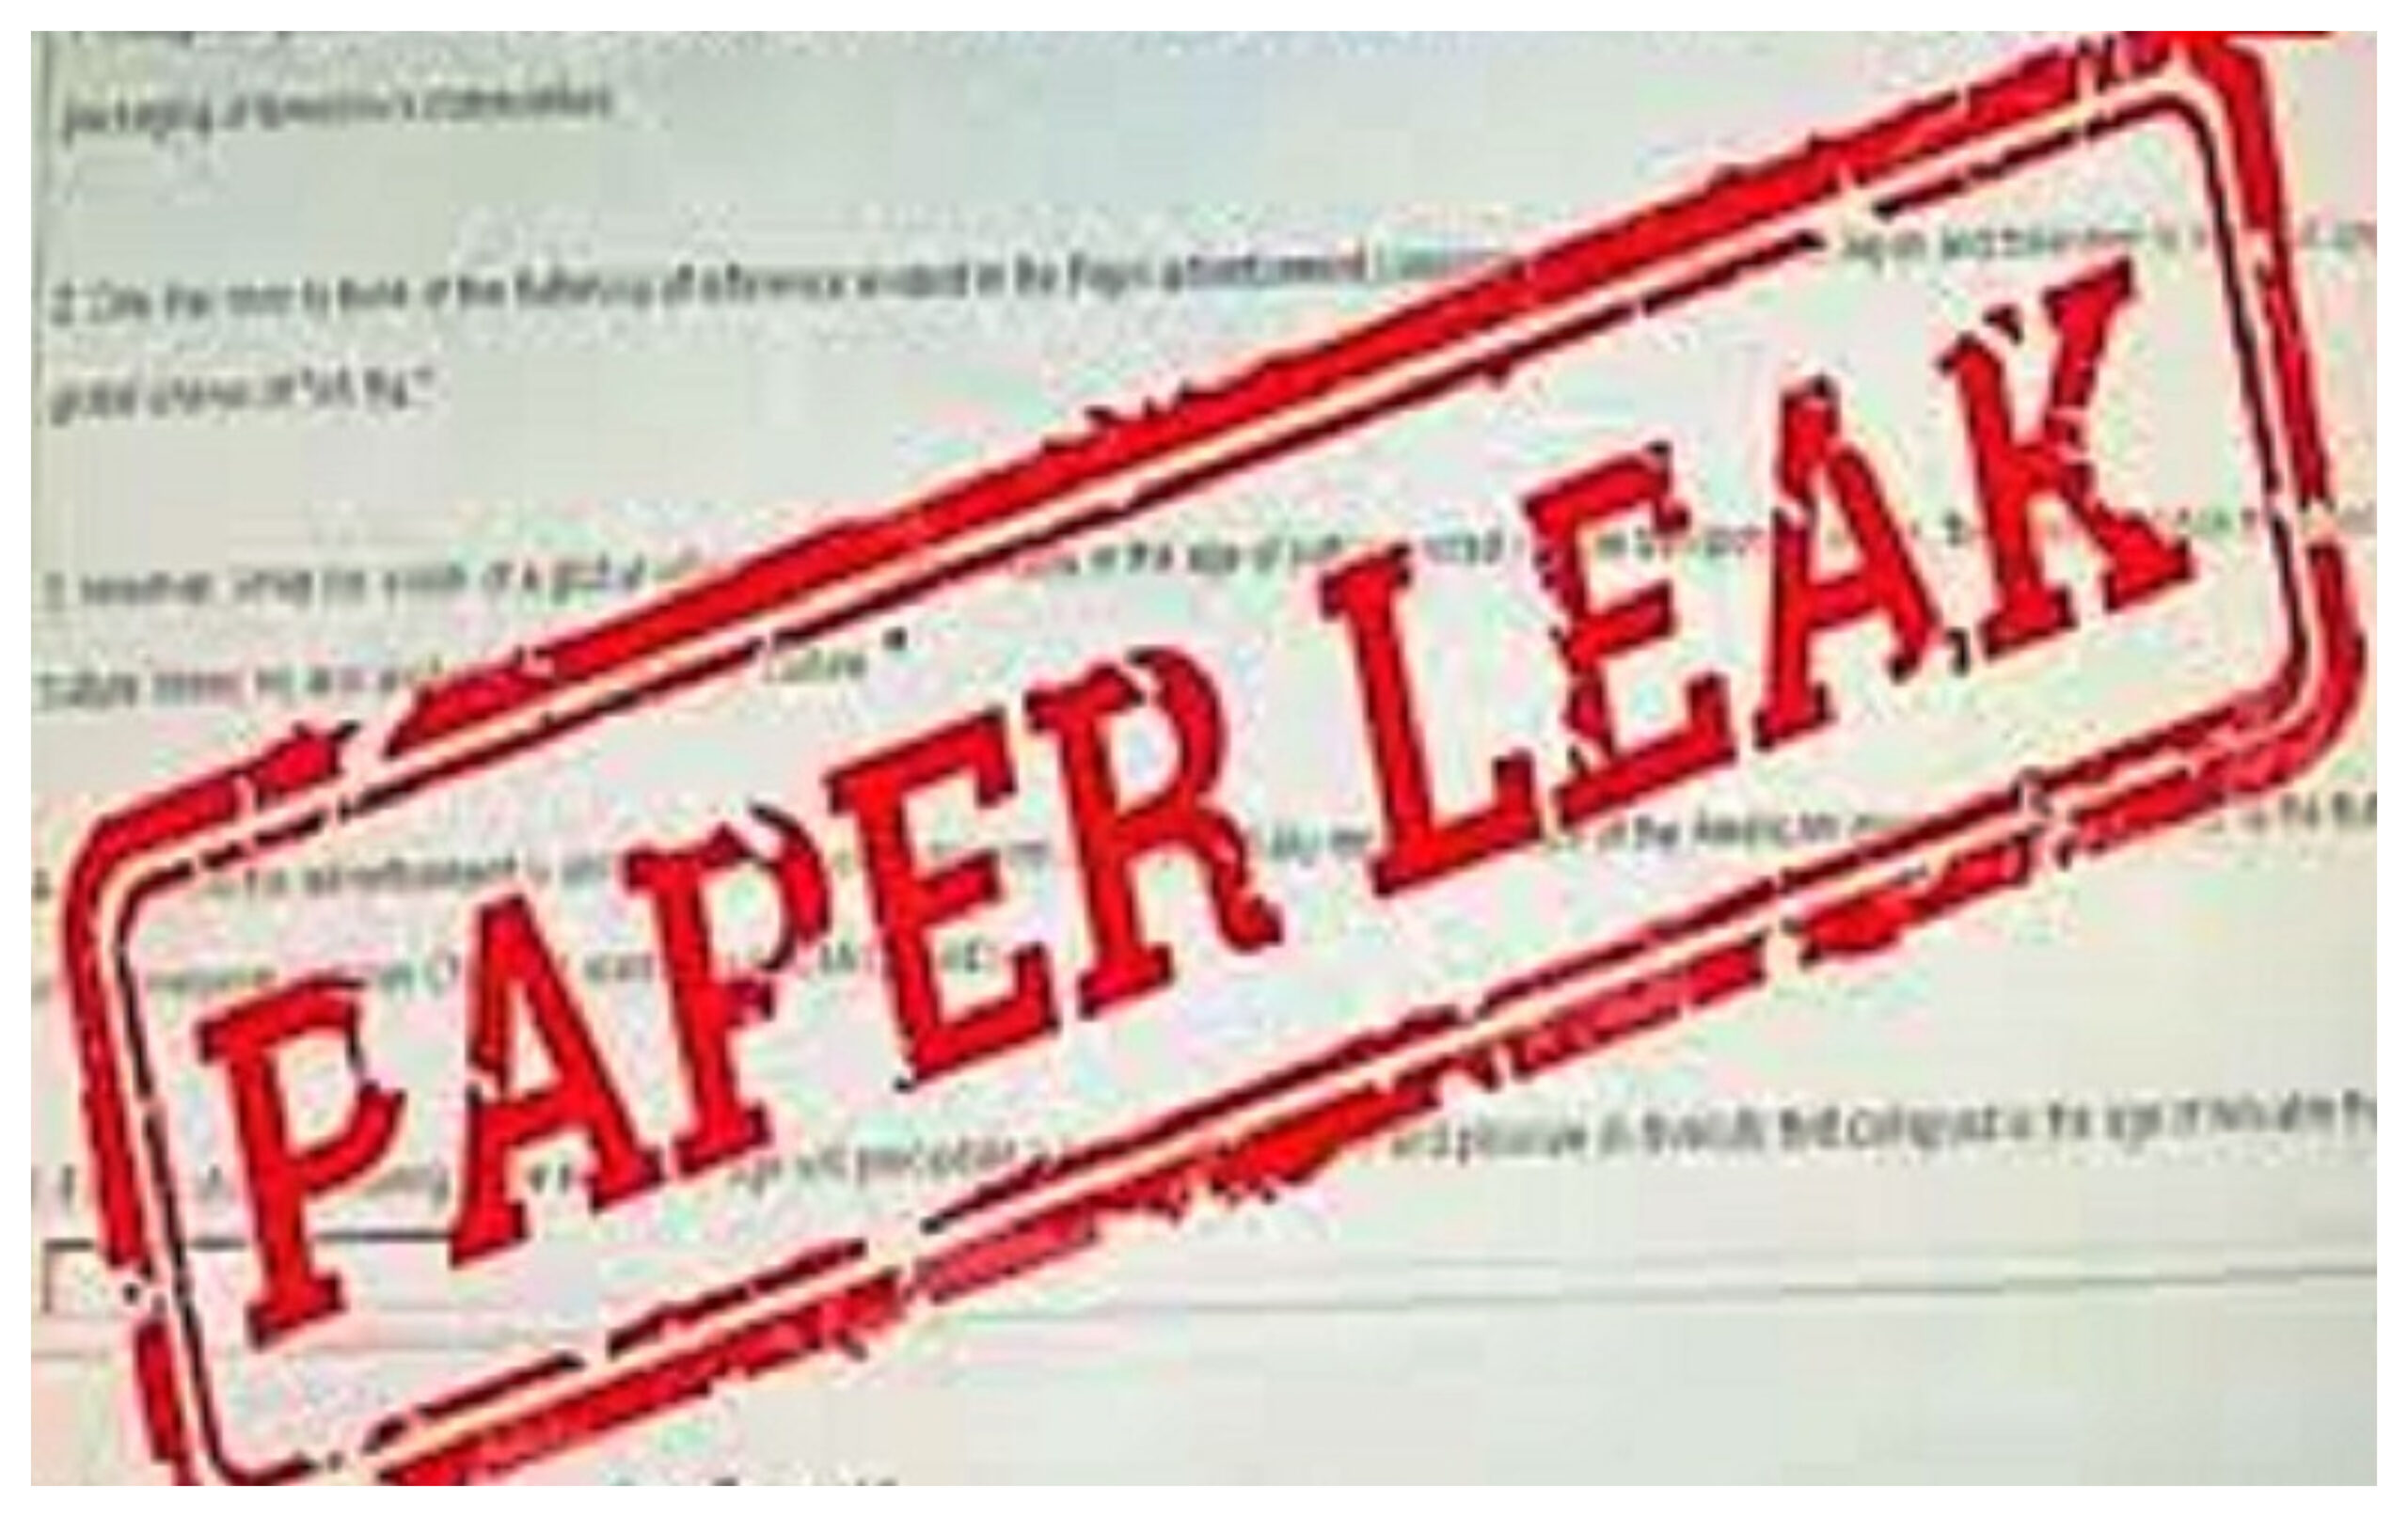 Paper Leak: How many papers were leaked in the last 15 years? Complete information related to Master Mind...